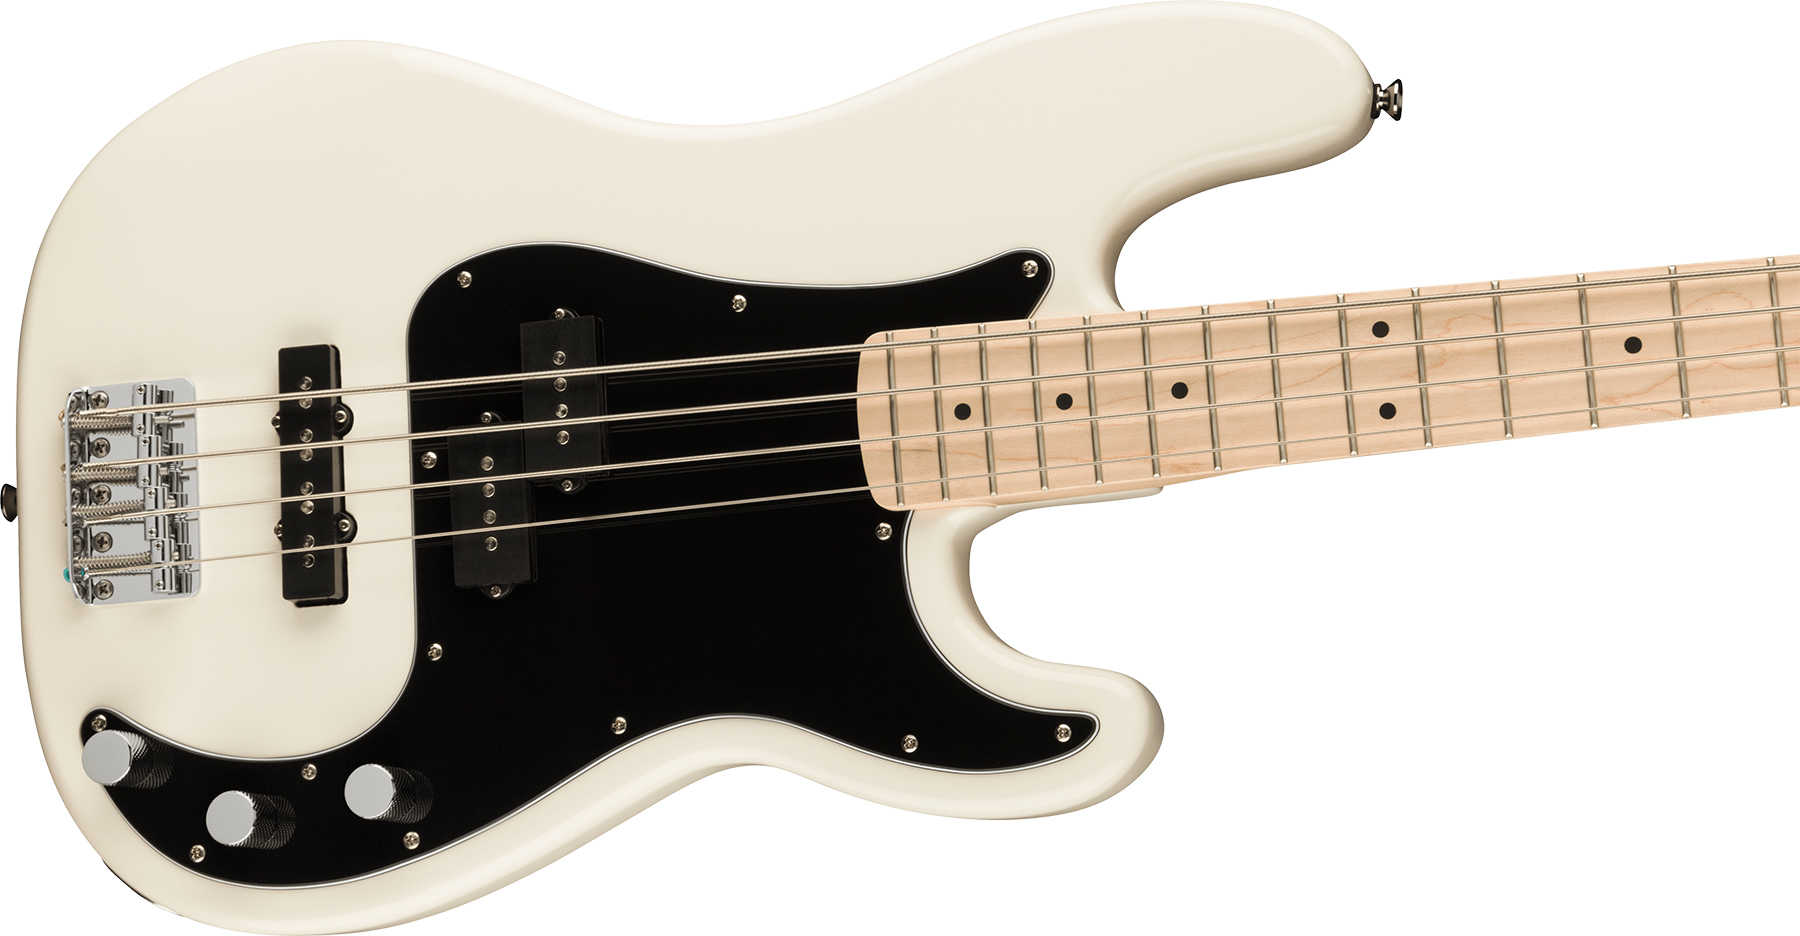 Squier Precision Bass Affinity Pj 2021 Mn - Olympic White - Solidbody E-bass - Variation 2